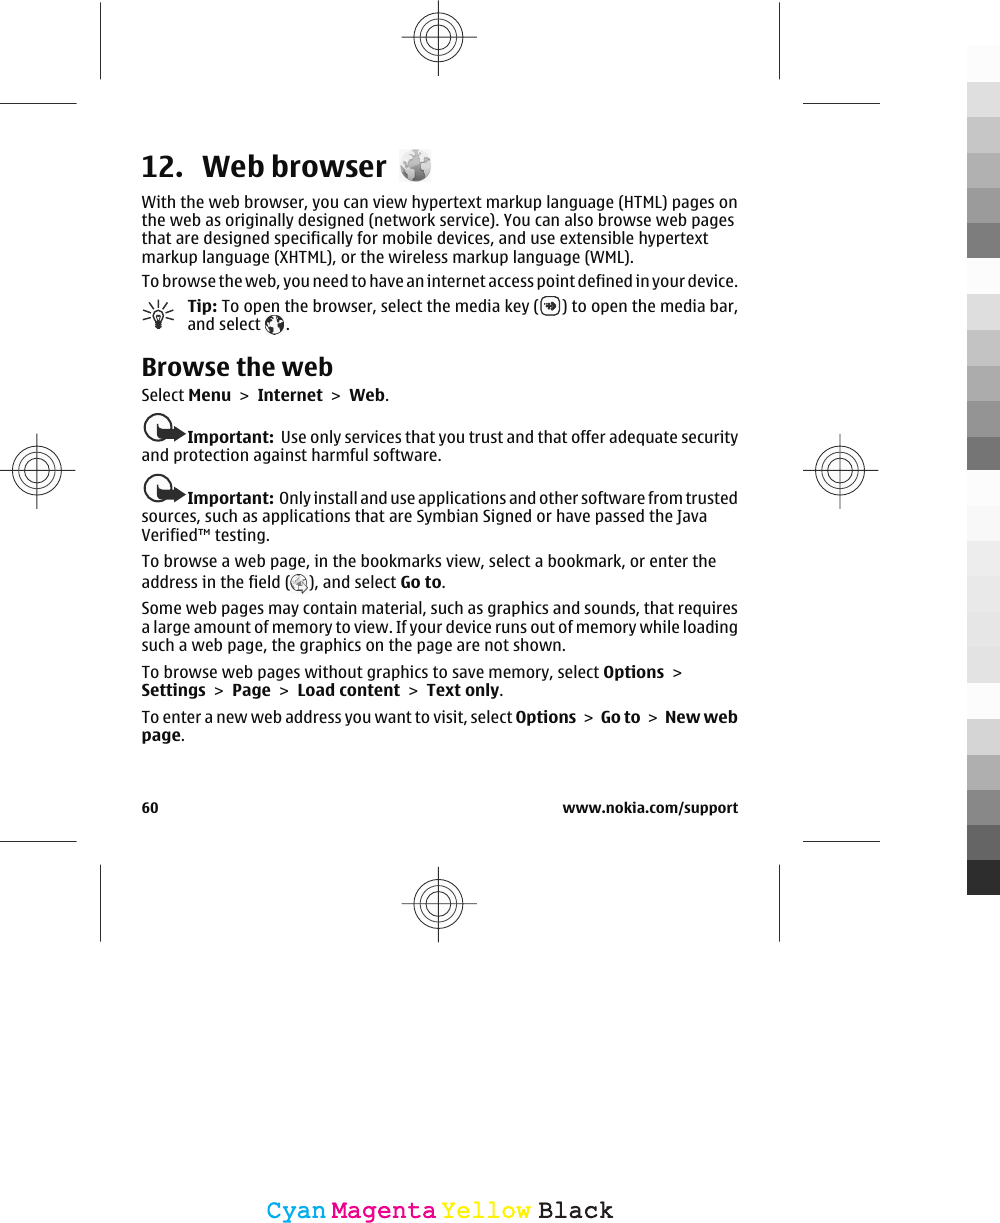 12. Web browserWith the web browser, you can view hypertext markup language (HTML) pages onthe web as originally designed (network service). You can also browse web pagesthat are designed specifically for mobile devices, and use extensible hypertextmarkup language (XHTML), or the wireless markup language (WML).To browse the web, you need to have an internet access point defined in your device.Tip: To open the browser, select the media key ( ) to open the media bar,and select  .Browse the webSelect Menu &gt; Internet &gt; Web.Important:  Use only services that you trust and that offer adequate securityand protection against harmful software.Important:  Only install and use applications and other software from trustedsources, such as applications that are Symbian Signed or have passed the JavaVerified™ testing.To browse a web page, in the bookmarks view, select a bookmark, or enter theaddress in the field ( ), and select Go to.Some web pages may contain material, such as graphics and sounds, that requiresa large amount of memory to view. If your device runs out of memory while loadingsuch a web page, the graphics on the page are not shown.To browse web pages without graphics to save memory, select Options &gt;Settings &gt; Page &gt; Load content &gt; Text only.To enter a new web address you want to visit, select Options &gt; Go to &gt; New webpage.60 www.nokia.com/supportCyanCyanMagentaMagentaYellowYellowBlackBlack